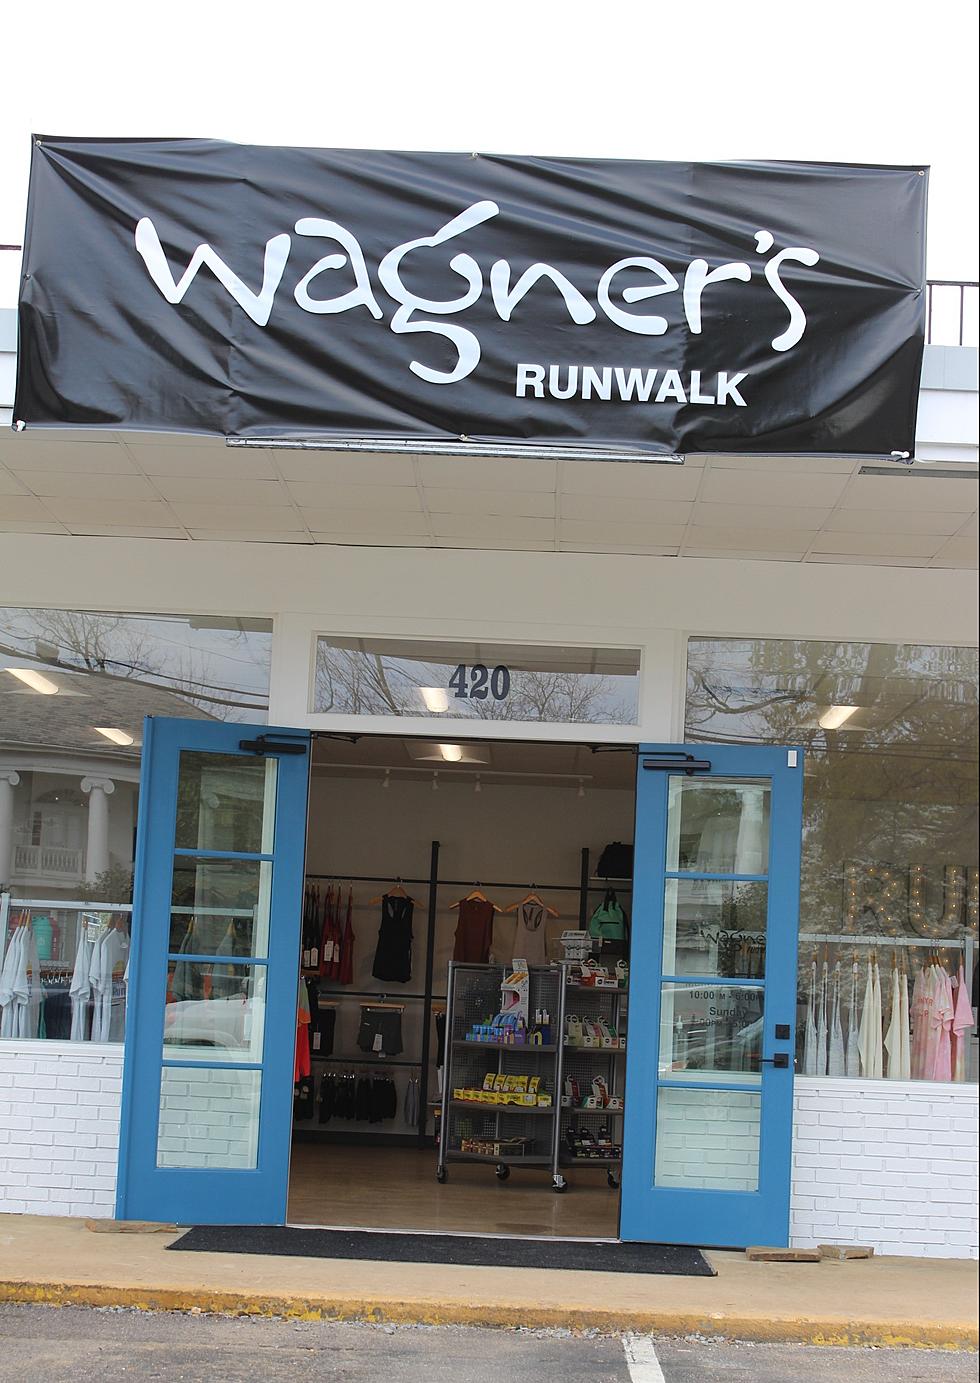 Wagner’s RunWalk Partners with Track Club to Host Turkey Trot in Tuscaloosa, Alabama